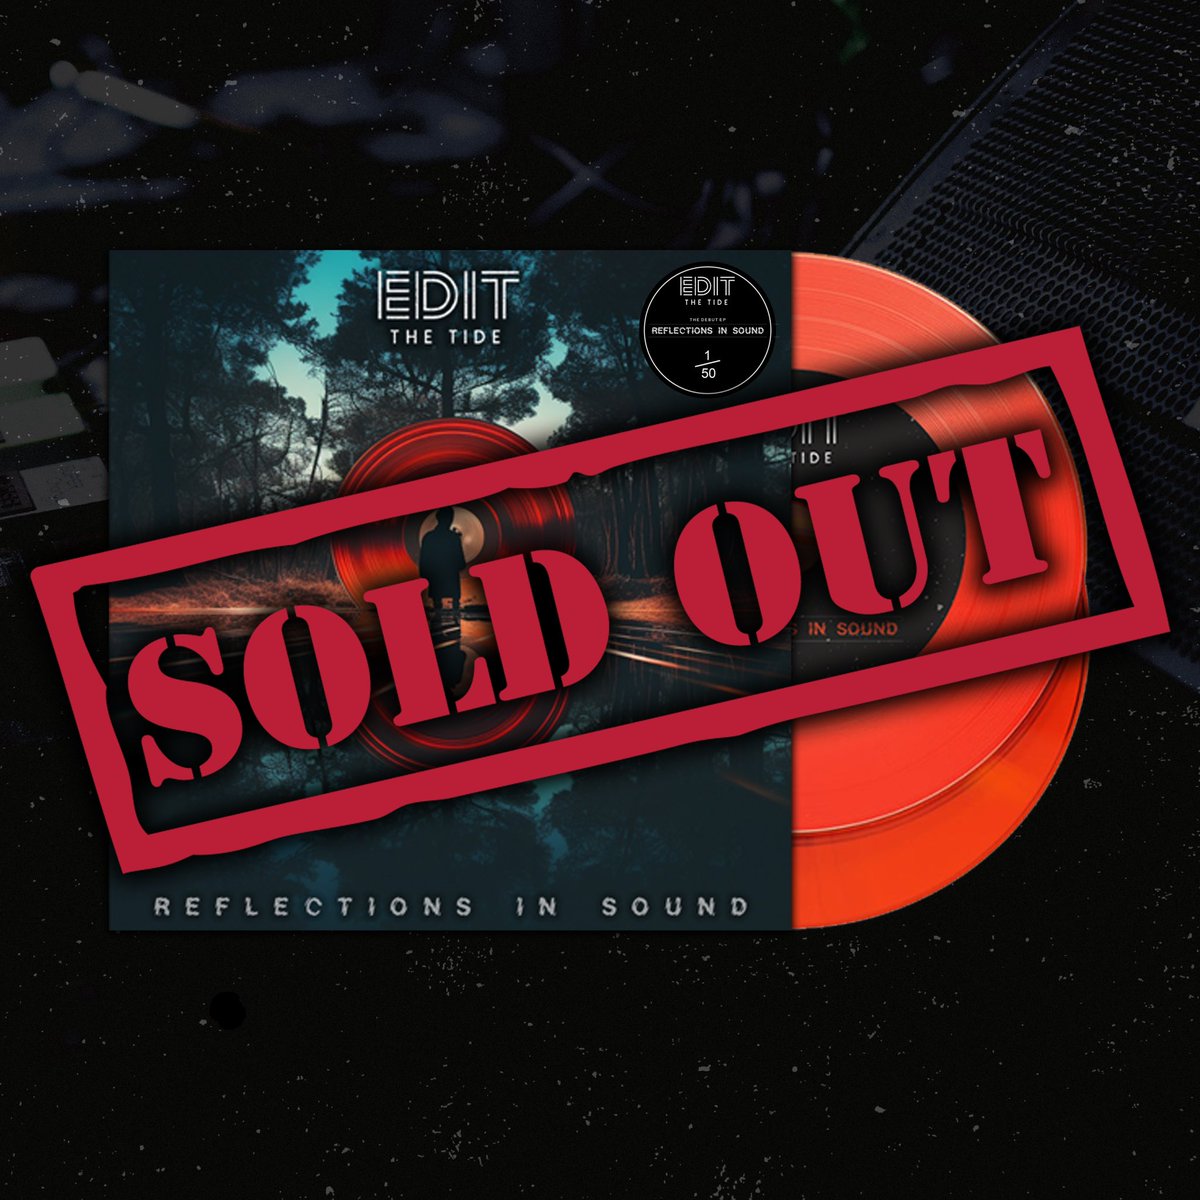 Our Limited Edition Version of the EP is now Sold Out! A huge thank you to everyone who’s picked up a copy! 🙏🏼 Standard Editions will be with us shortly and added to the store for anyone who wanted a copy but missed out on the Limited ones! 💿 #bandmerch #cd #cassette #tshirts